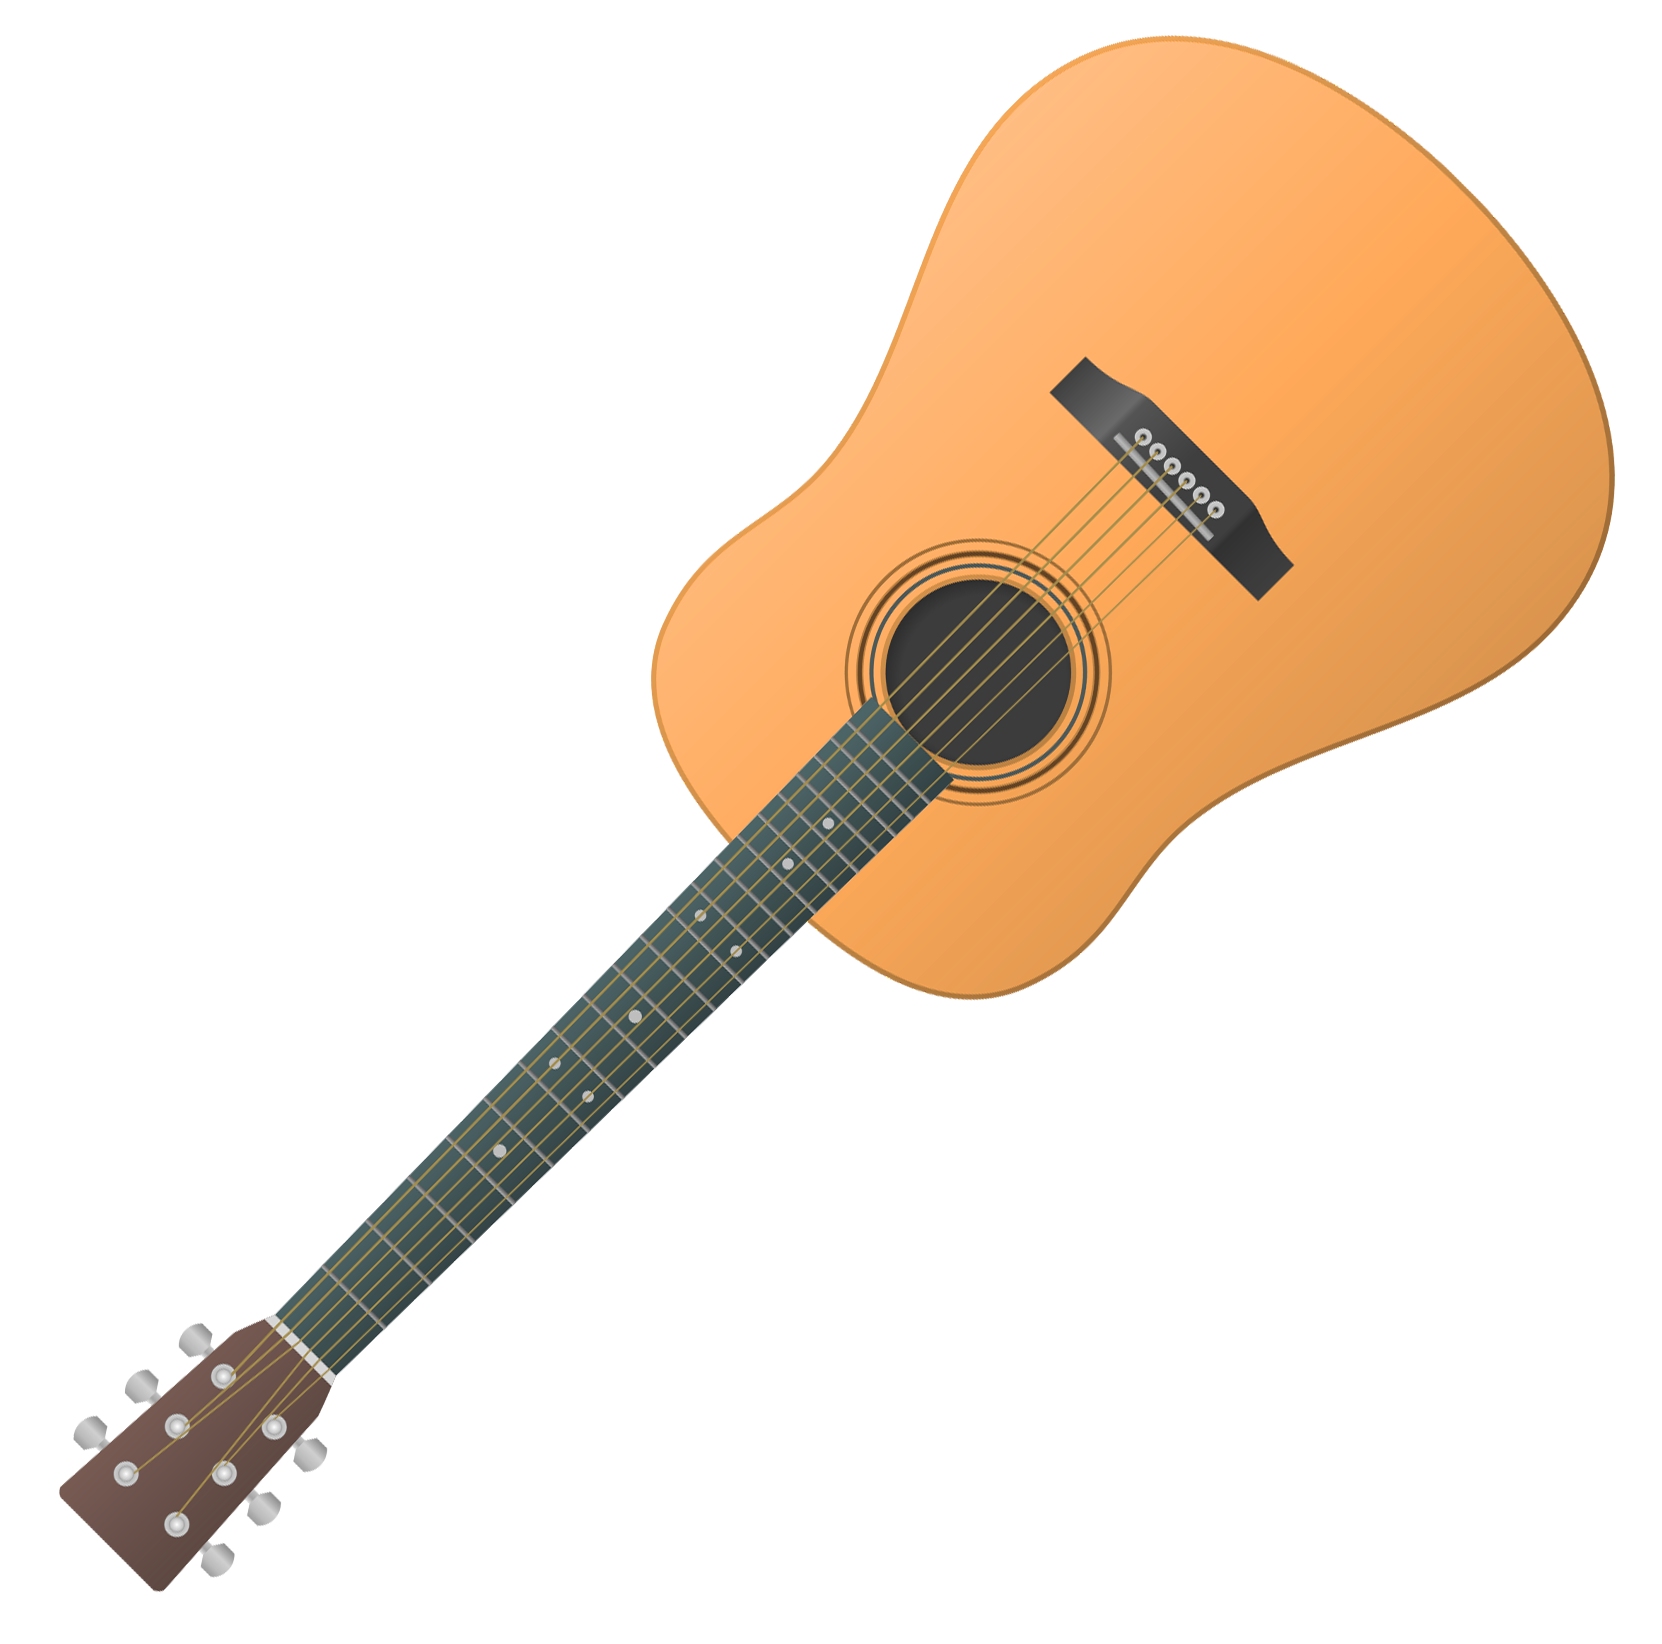 Guitar Vector Png Transparent Image - Style, Transparent background PNG HD thumbnail